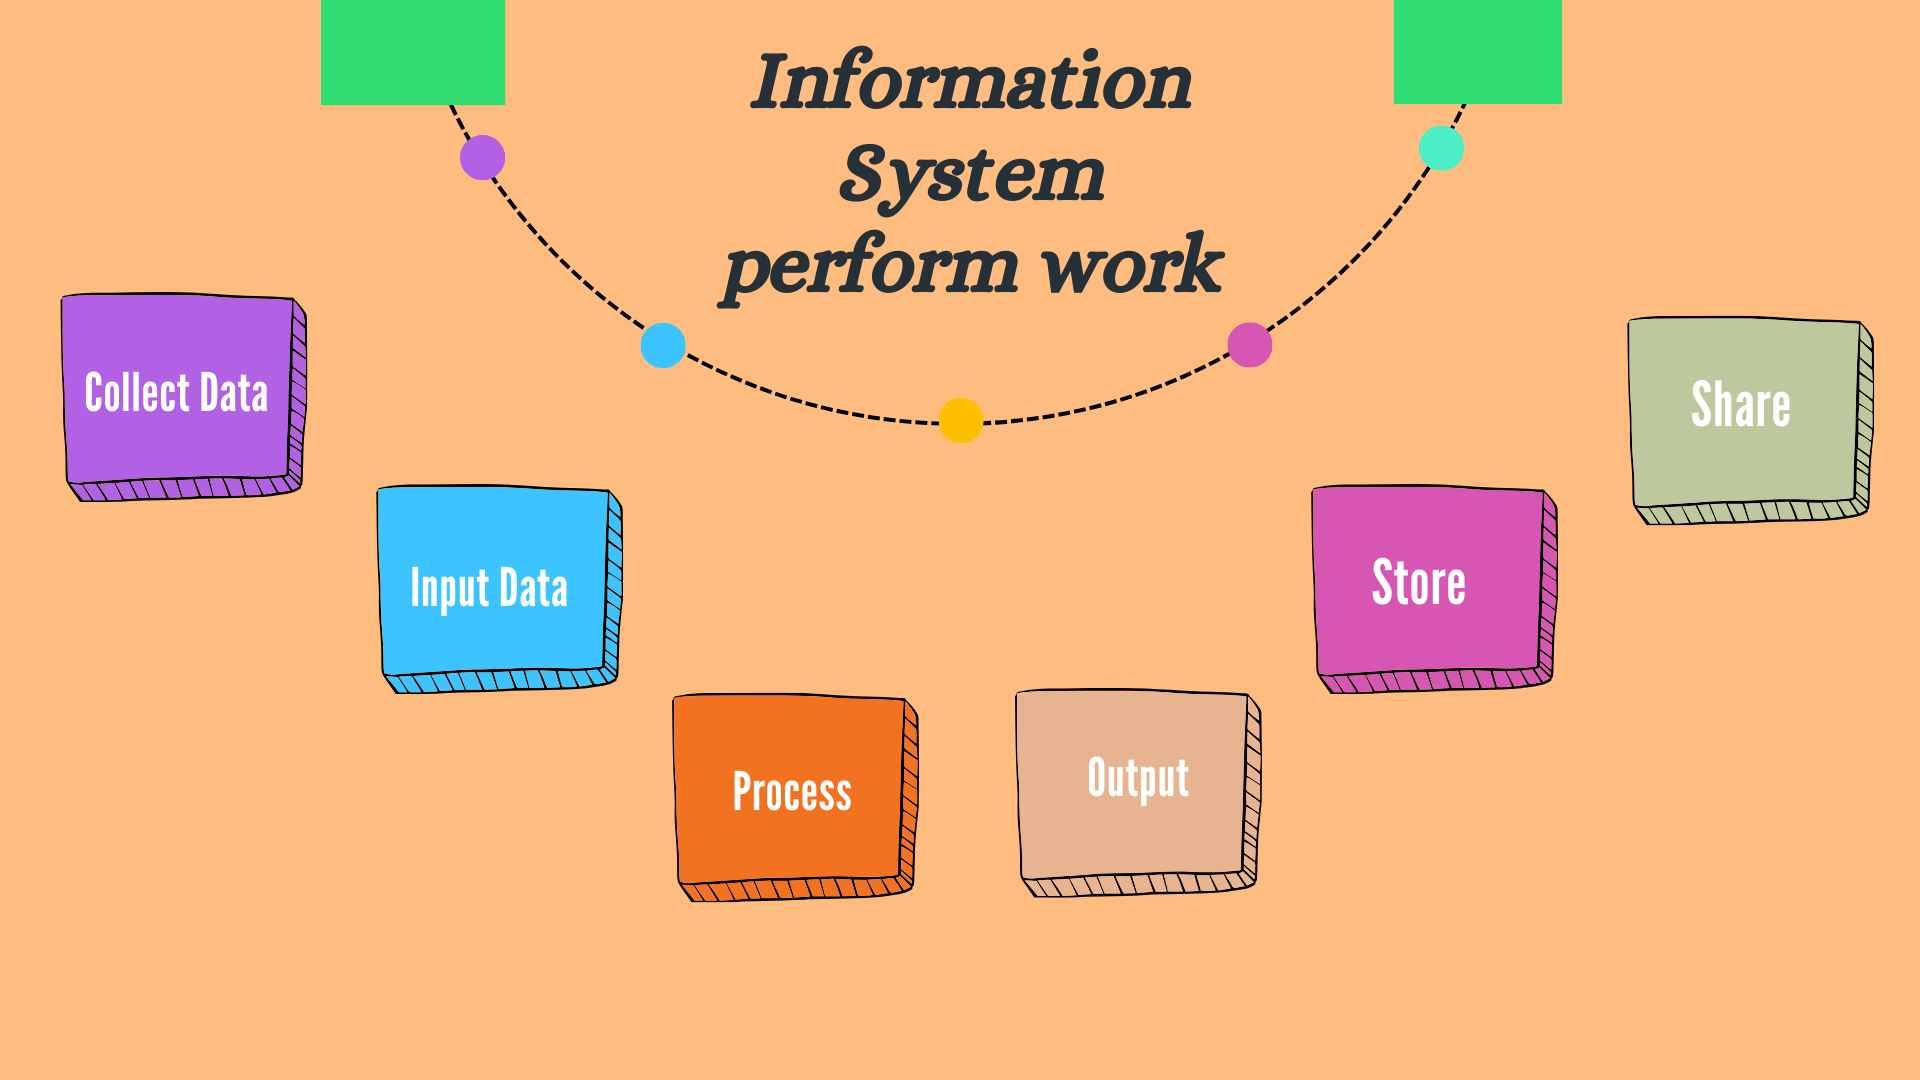 How does an Information System perform work?